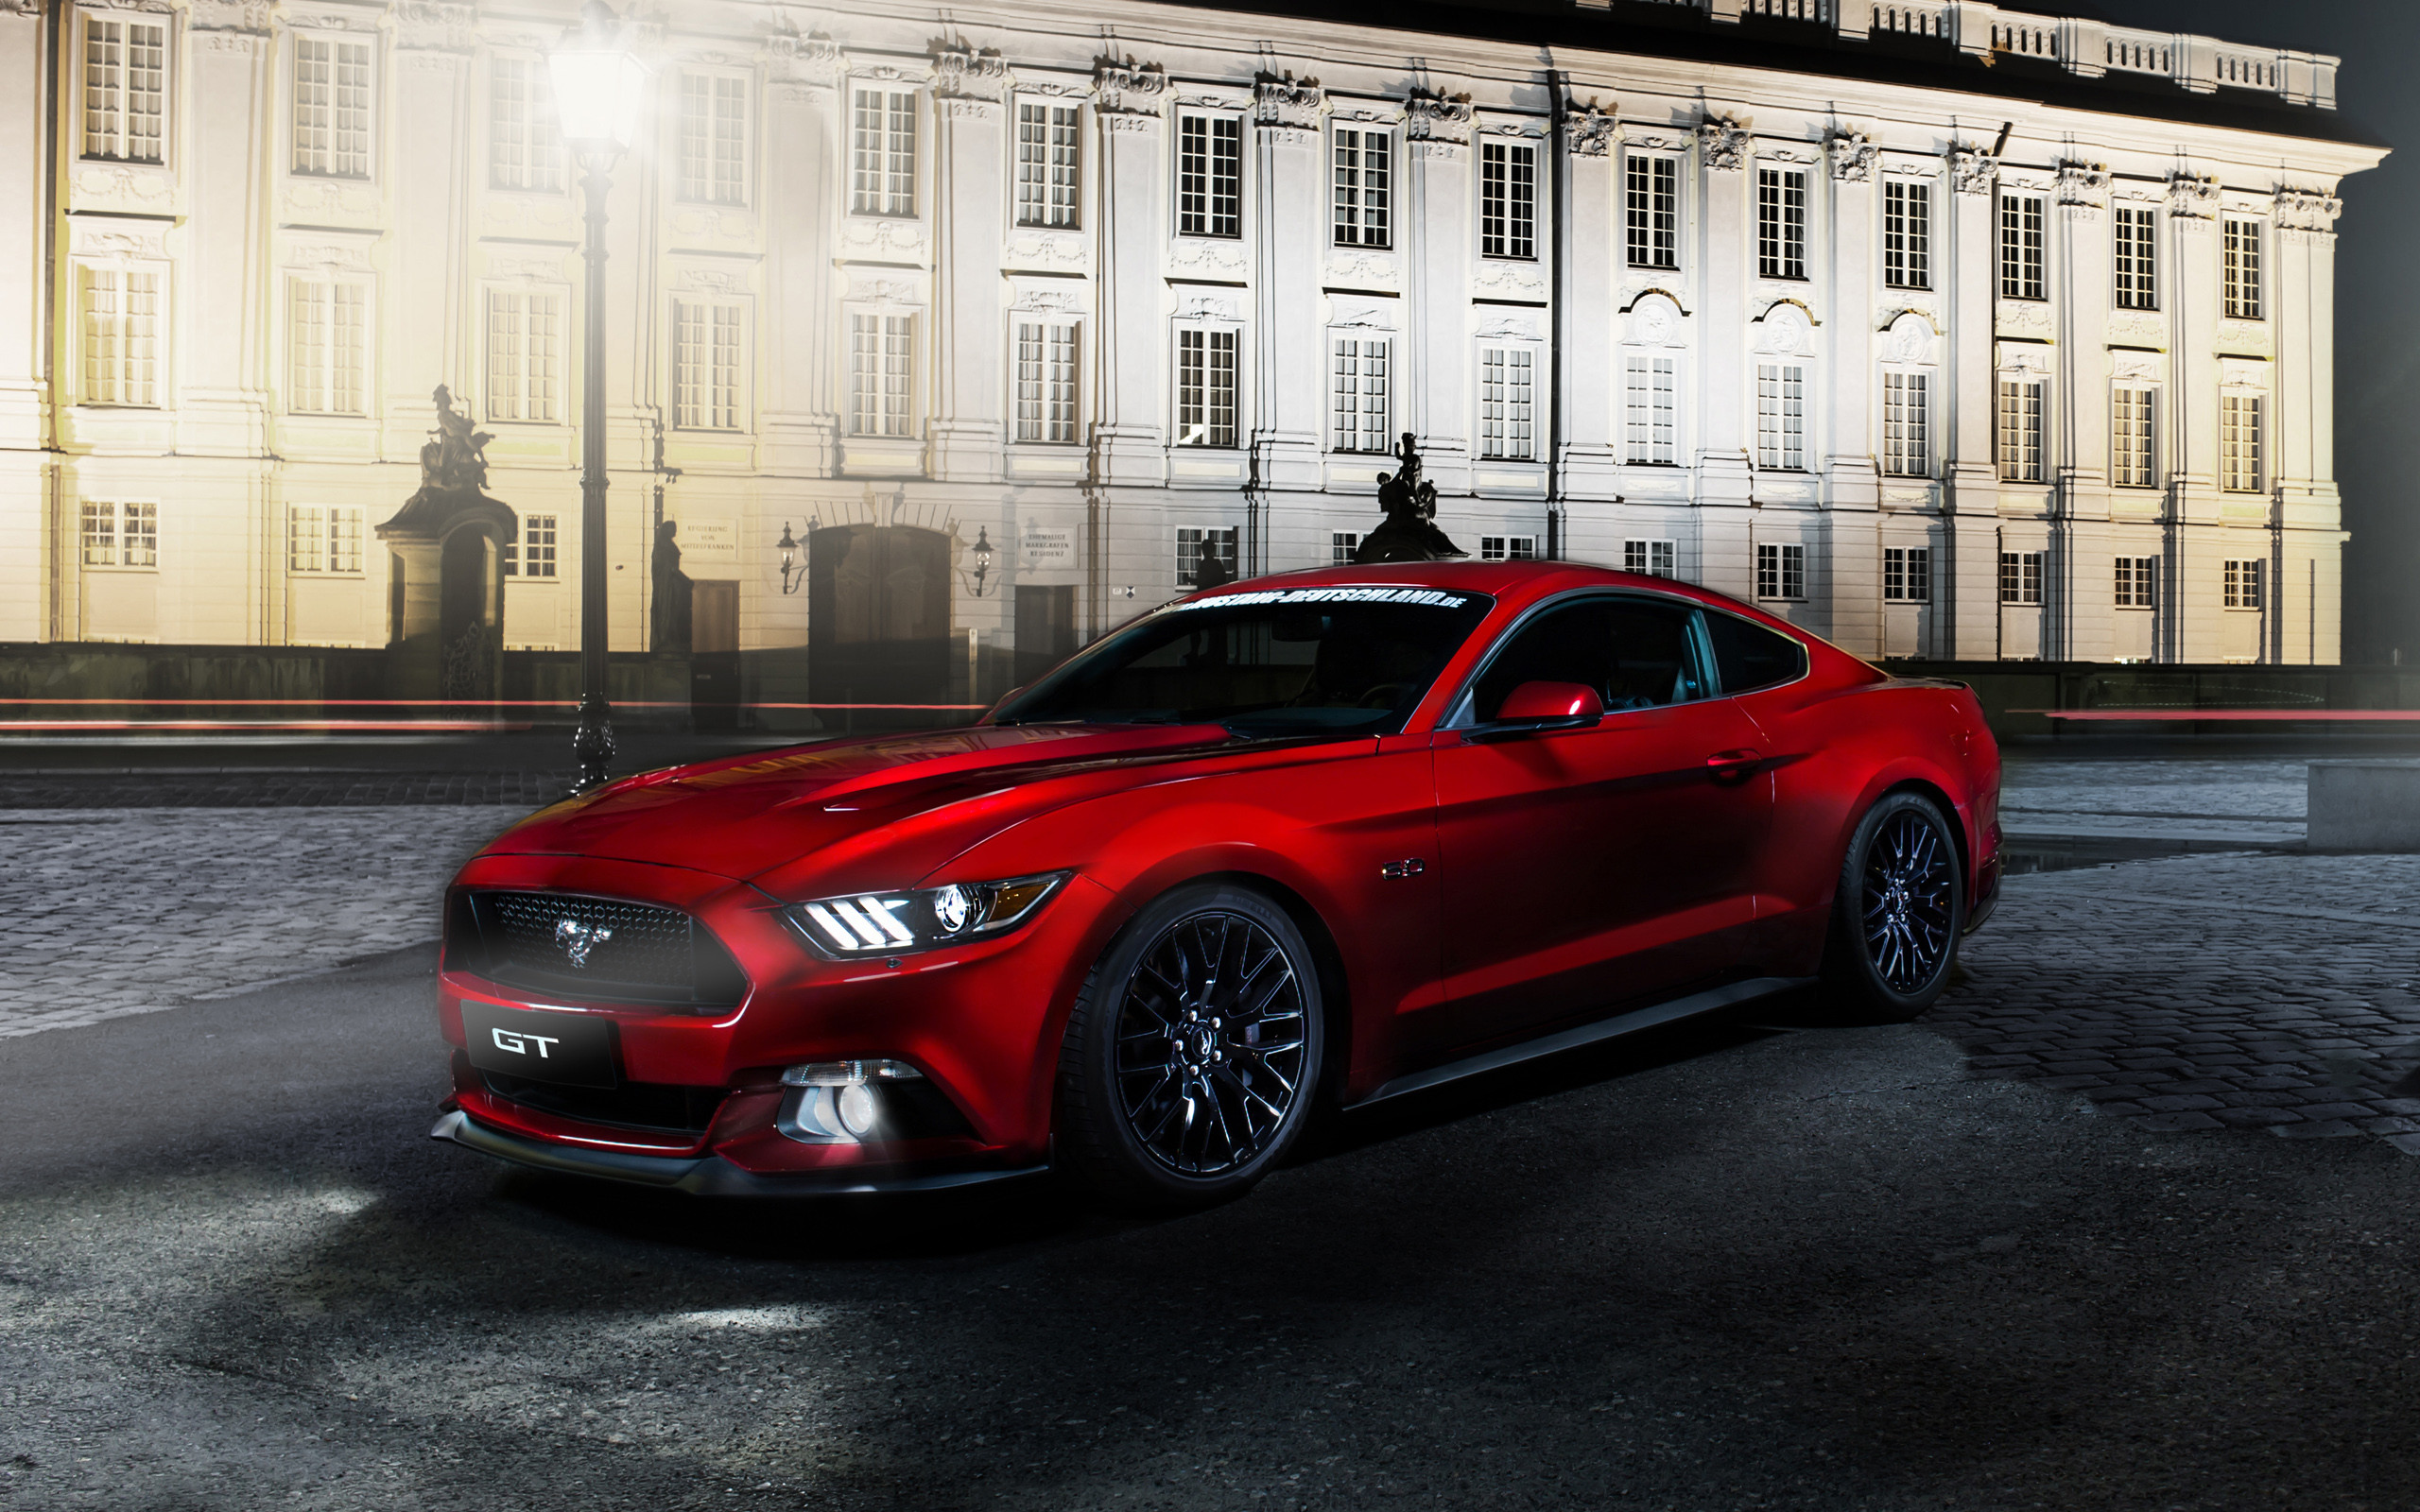 Mustang Gt Wallpaper 81 Pictures Images, Photos, Reviews